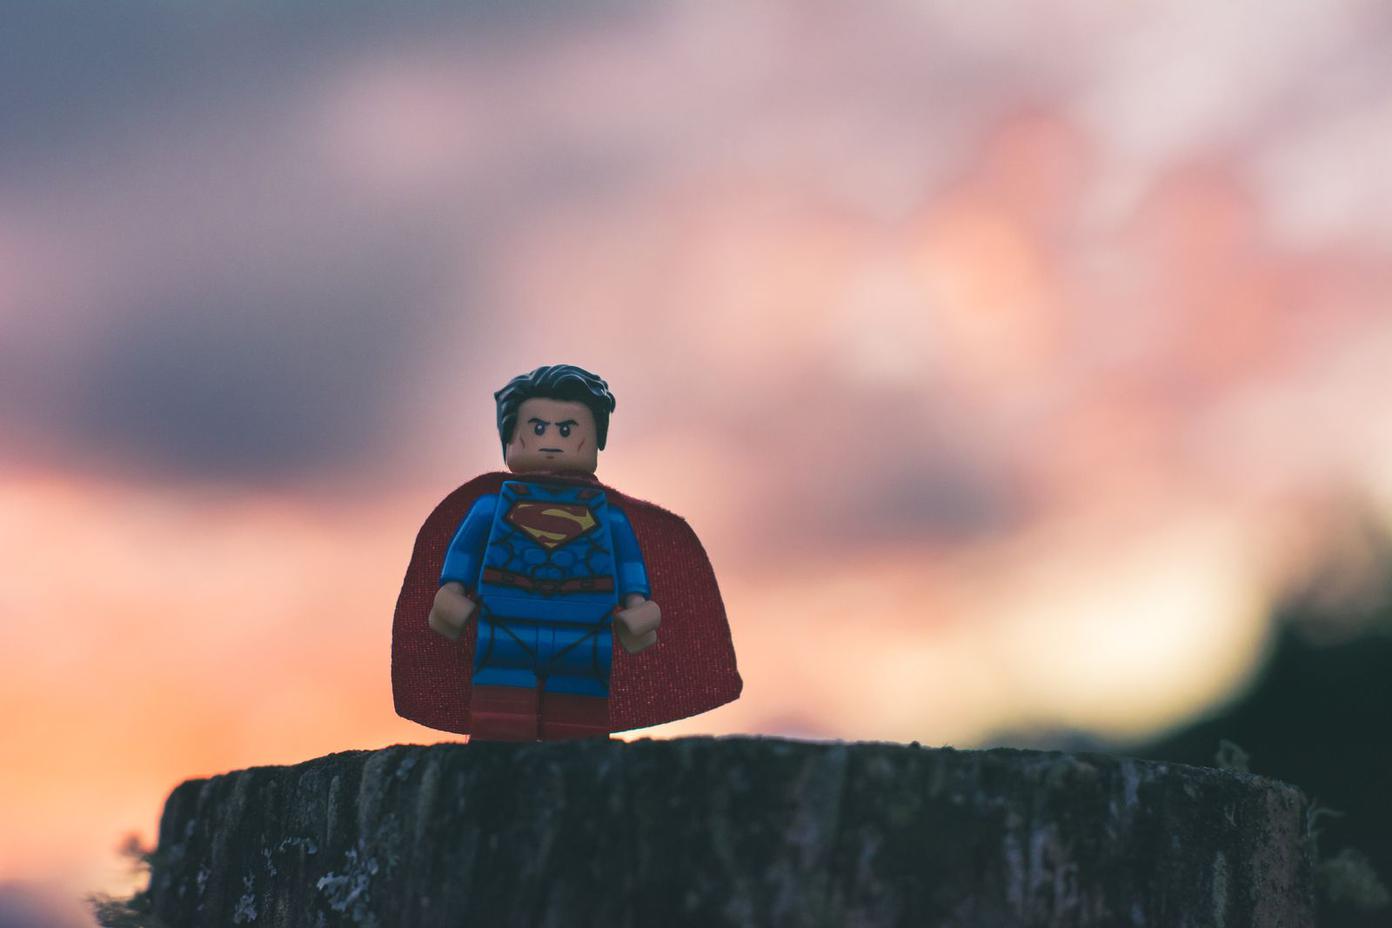 Lego Superman figure standing on a cliff overlooking a cloudy sunset